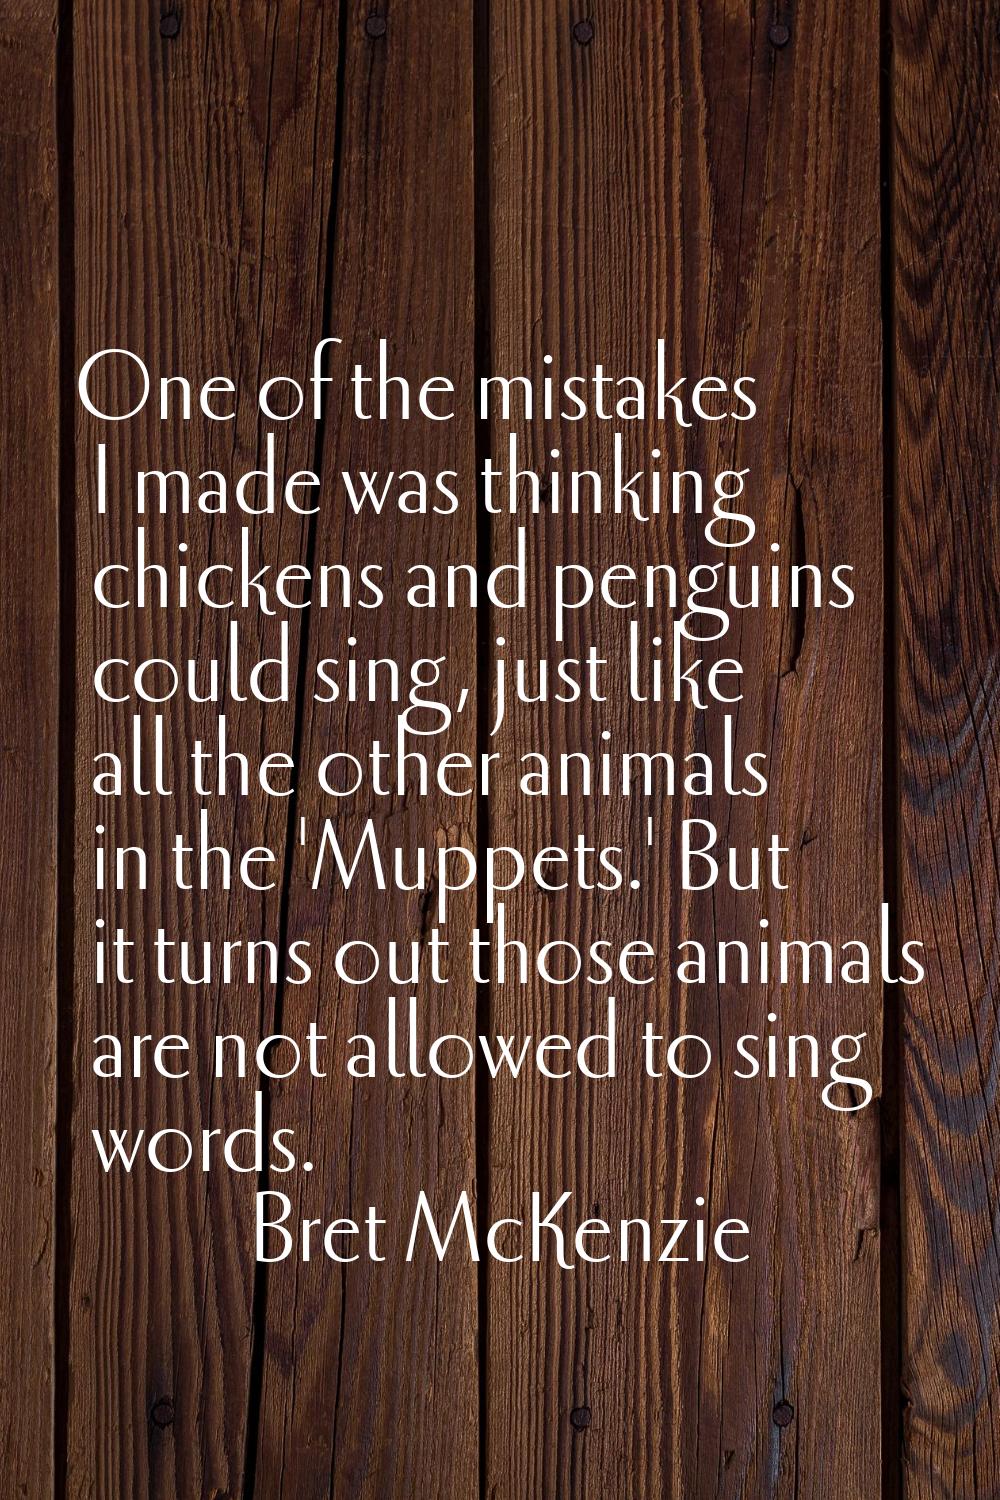 One of the mistakes I made was thinking chickens and penguins could sing, just like all the other a